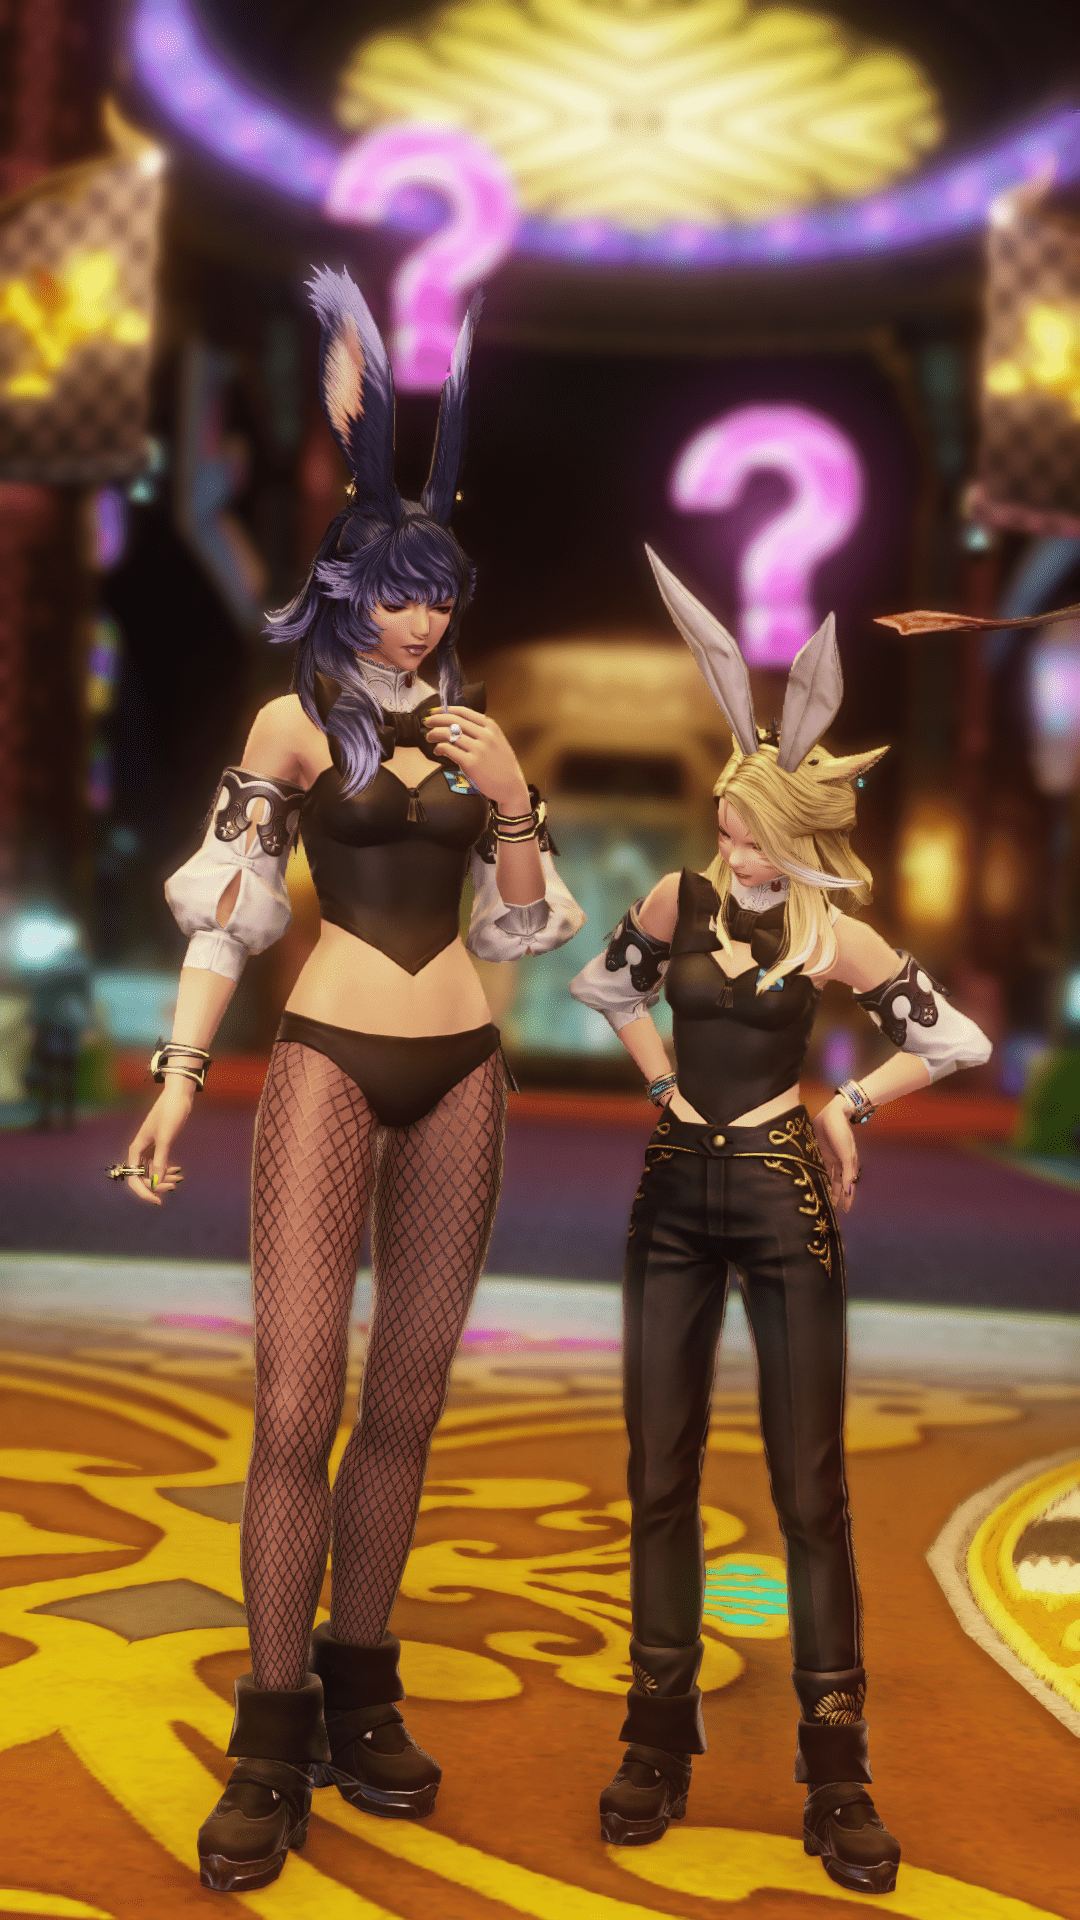 The Little One and I, in Final Fantasy XIV, wearing bunny outfits in the Gold Saucer